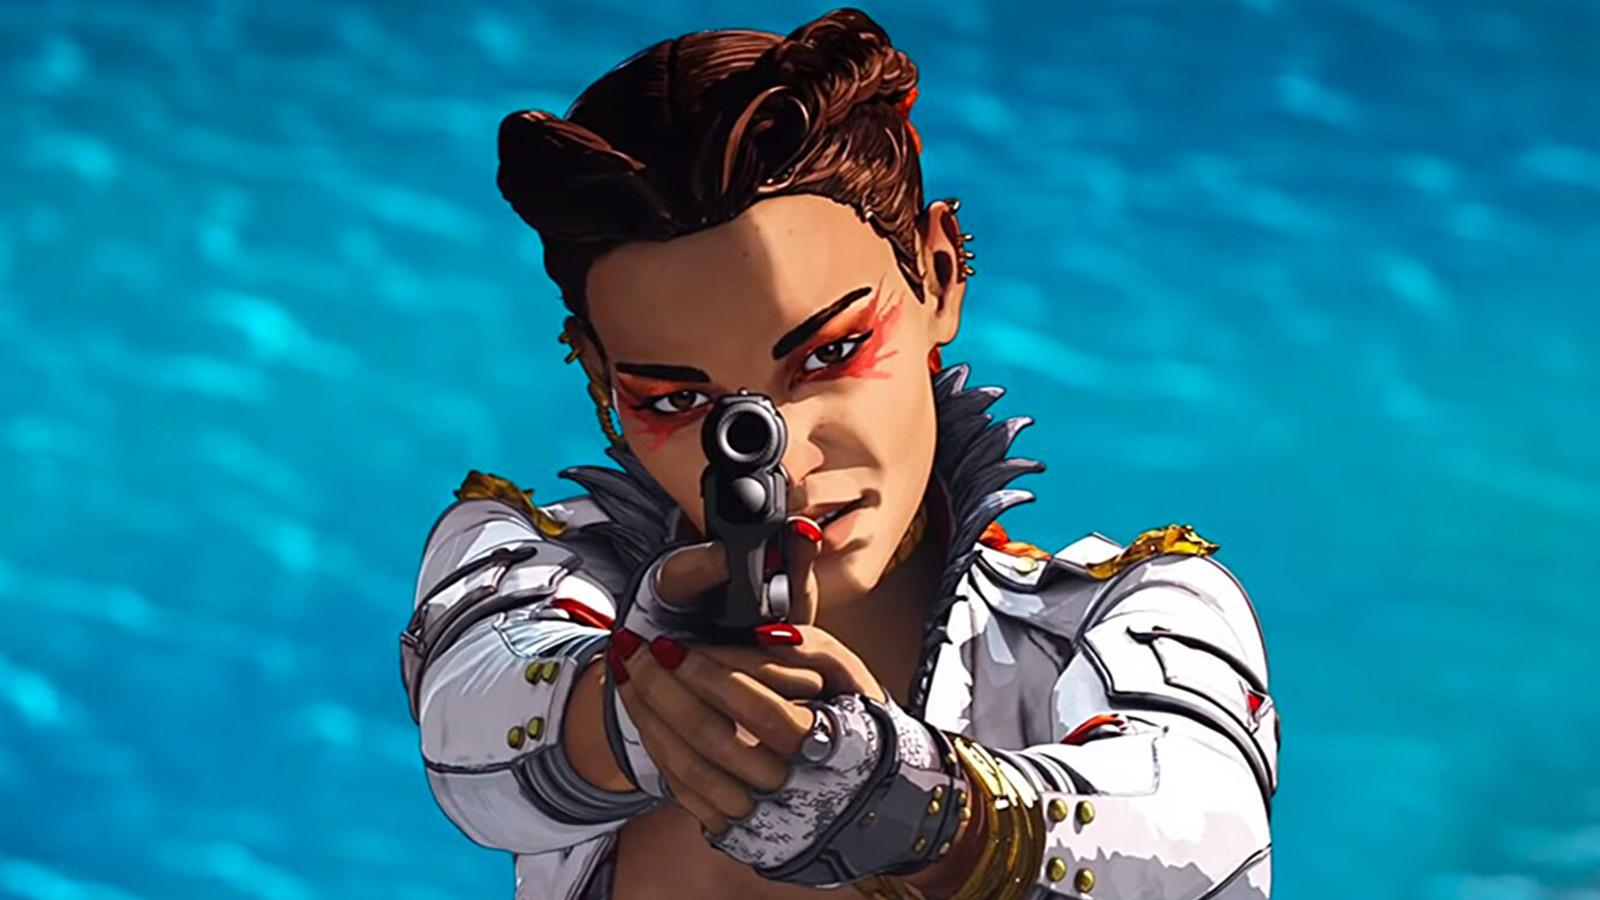 Loba from Apex Legends